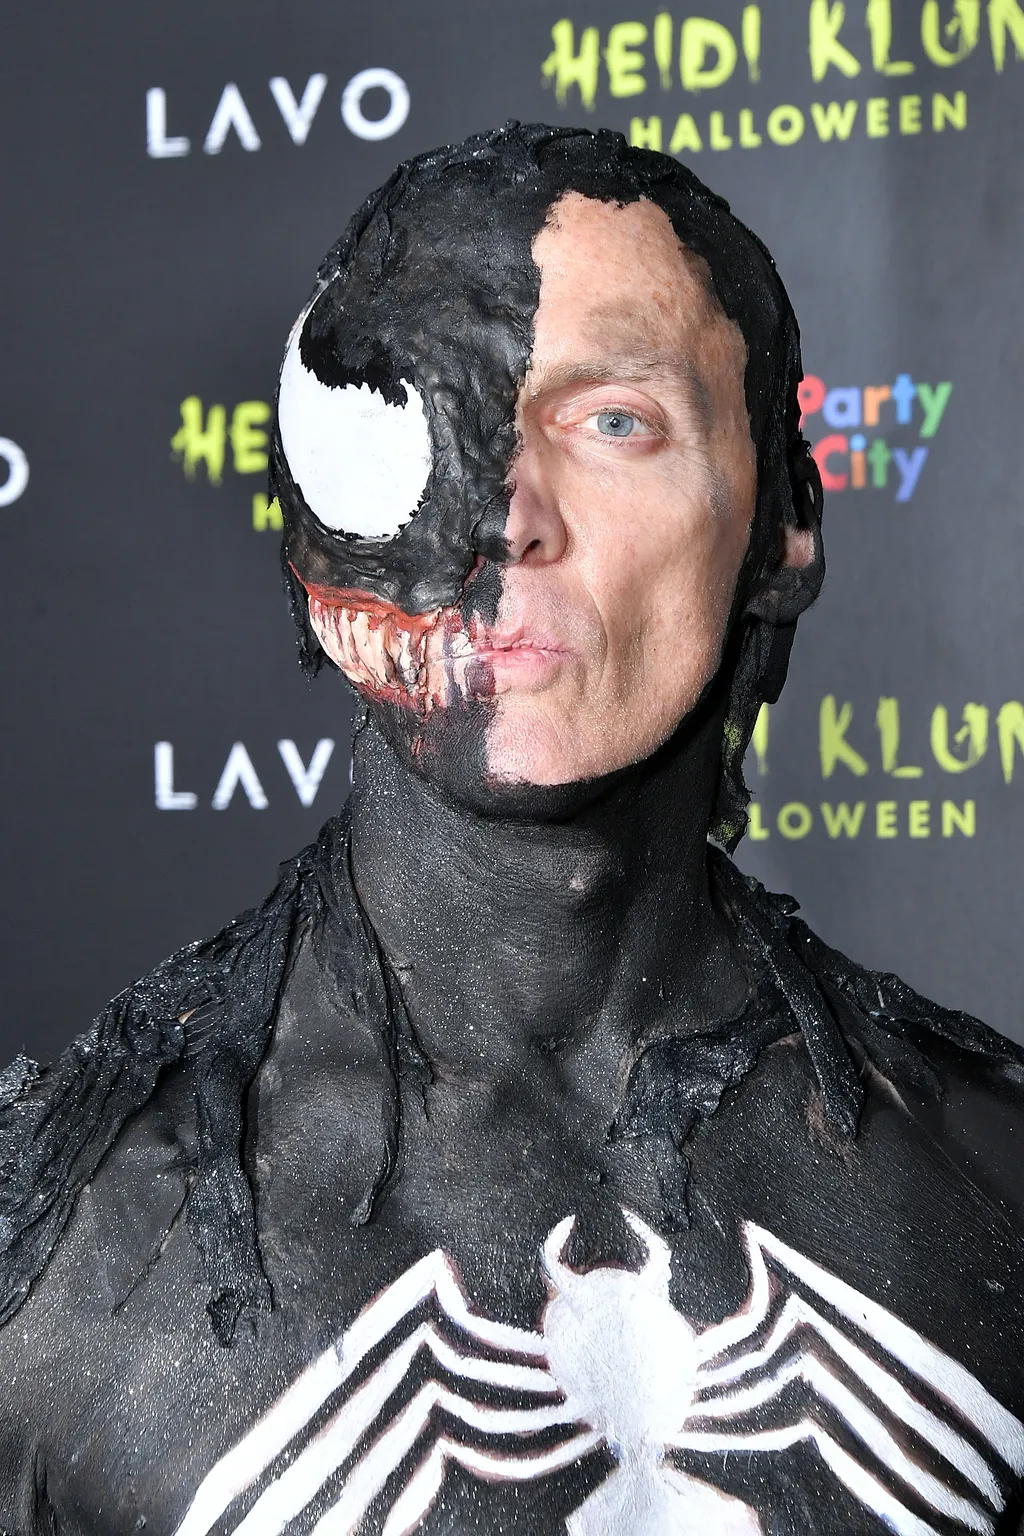 Heidi Klum's 19th Annual Halloween Party GettyImageRank3 Arts Culture and Entertainment Celebrities 